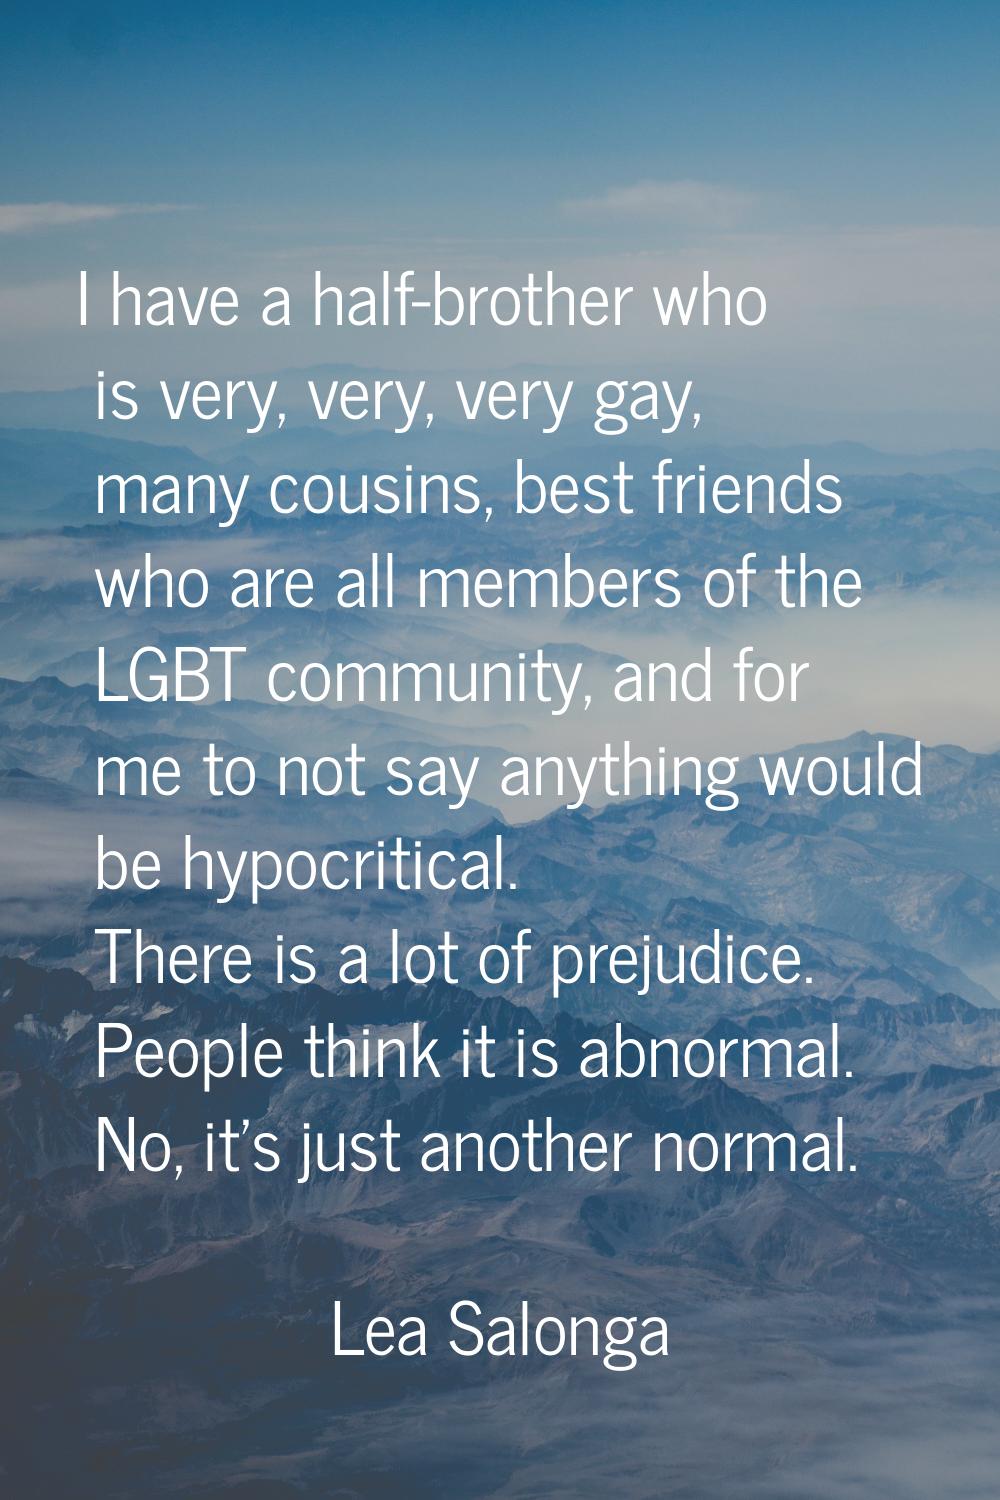 I have a half-brother who is very, very, very gay, many cousins, best friends who are all members o